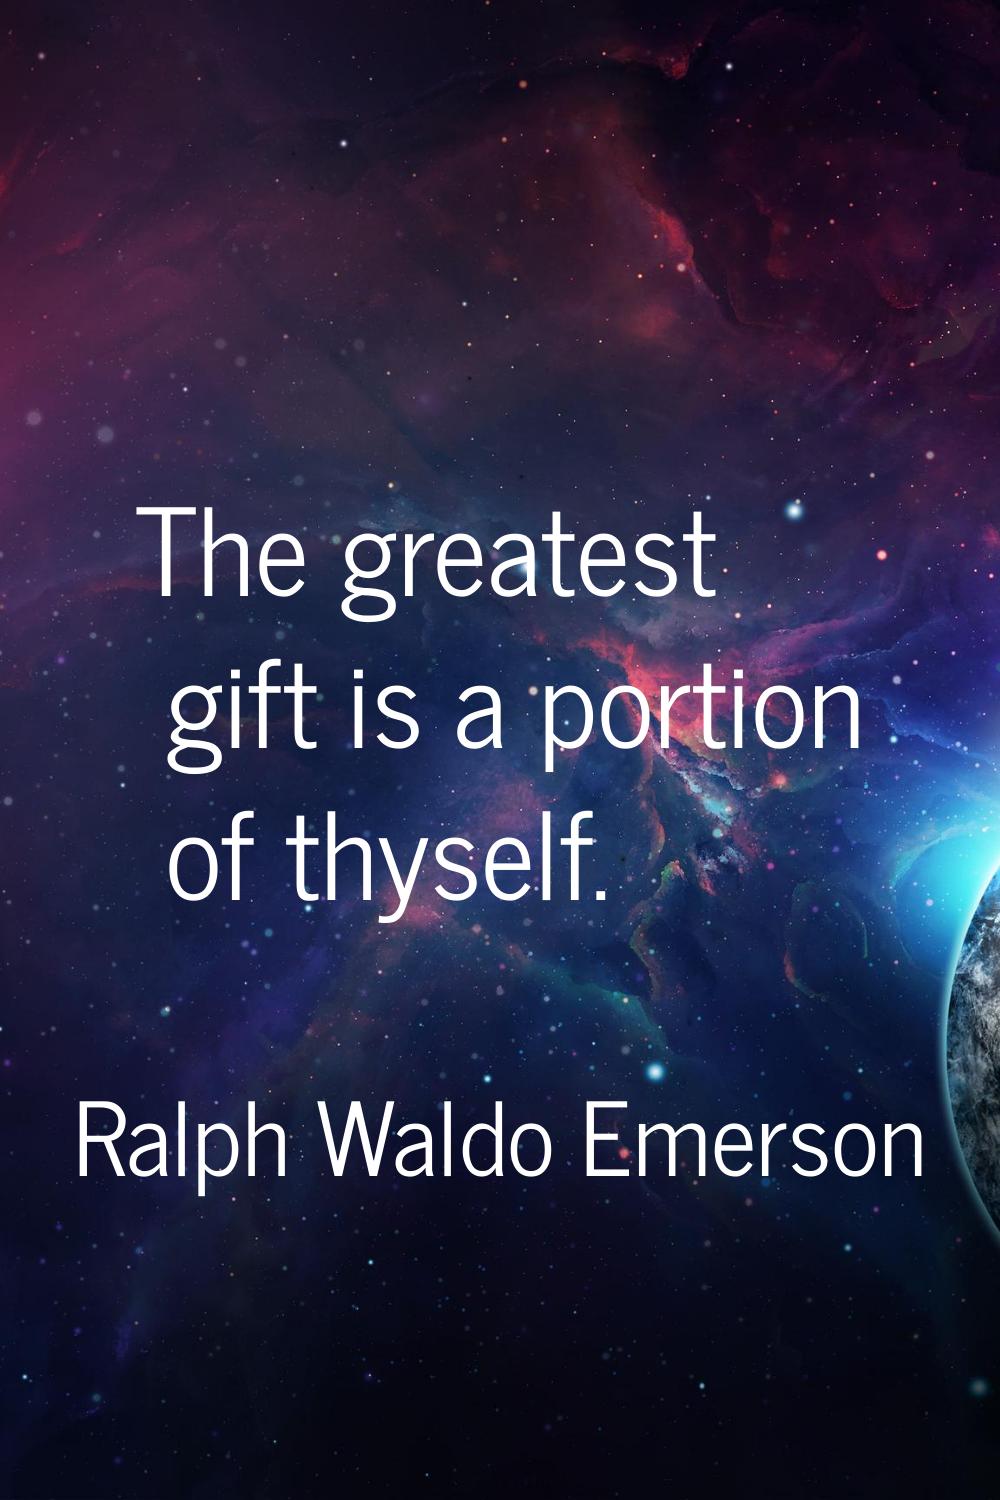 The greatest gift is a portion of thyself.